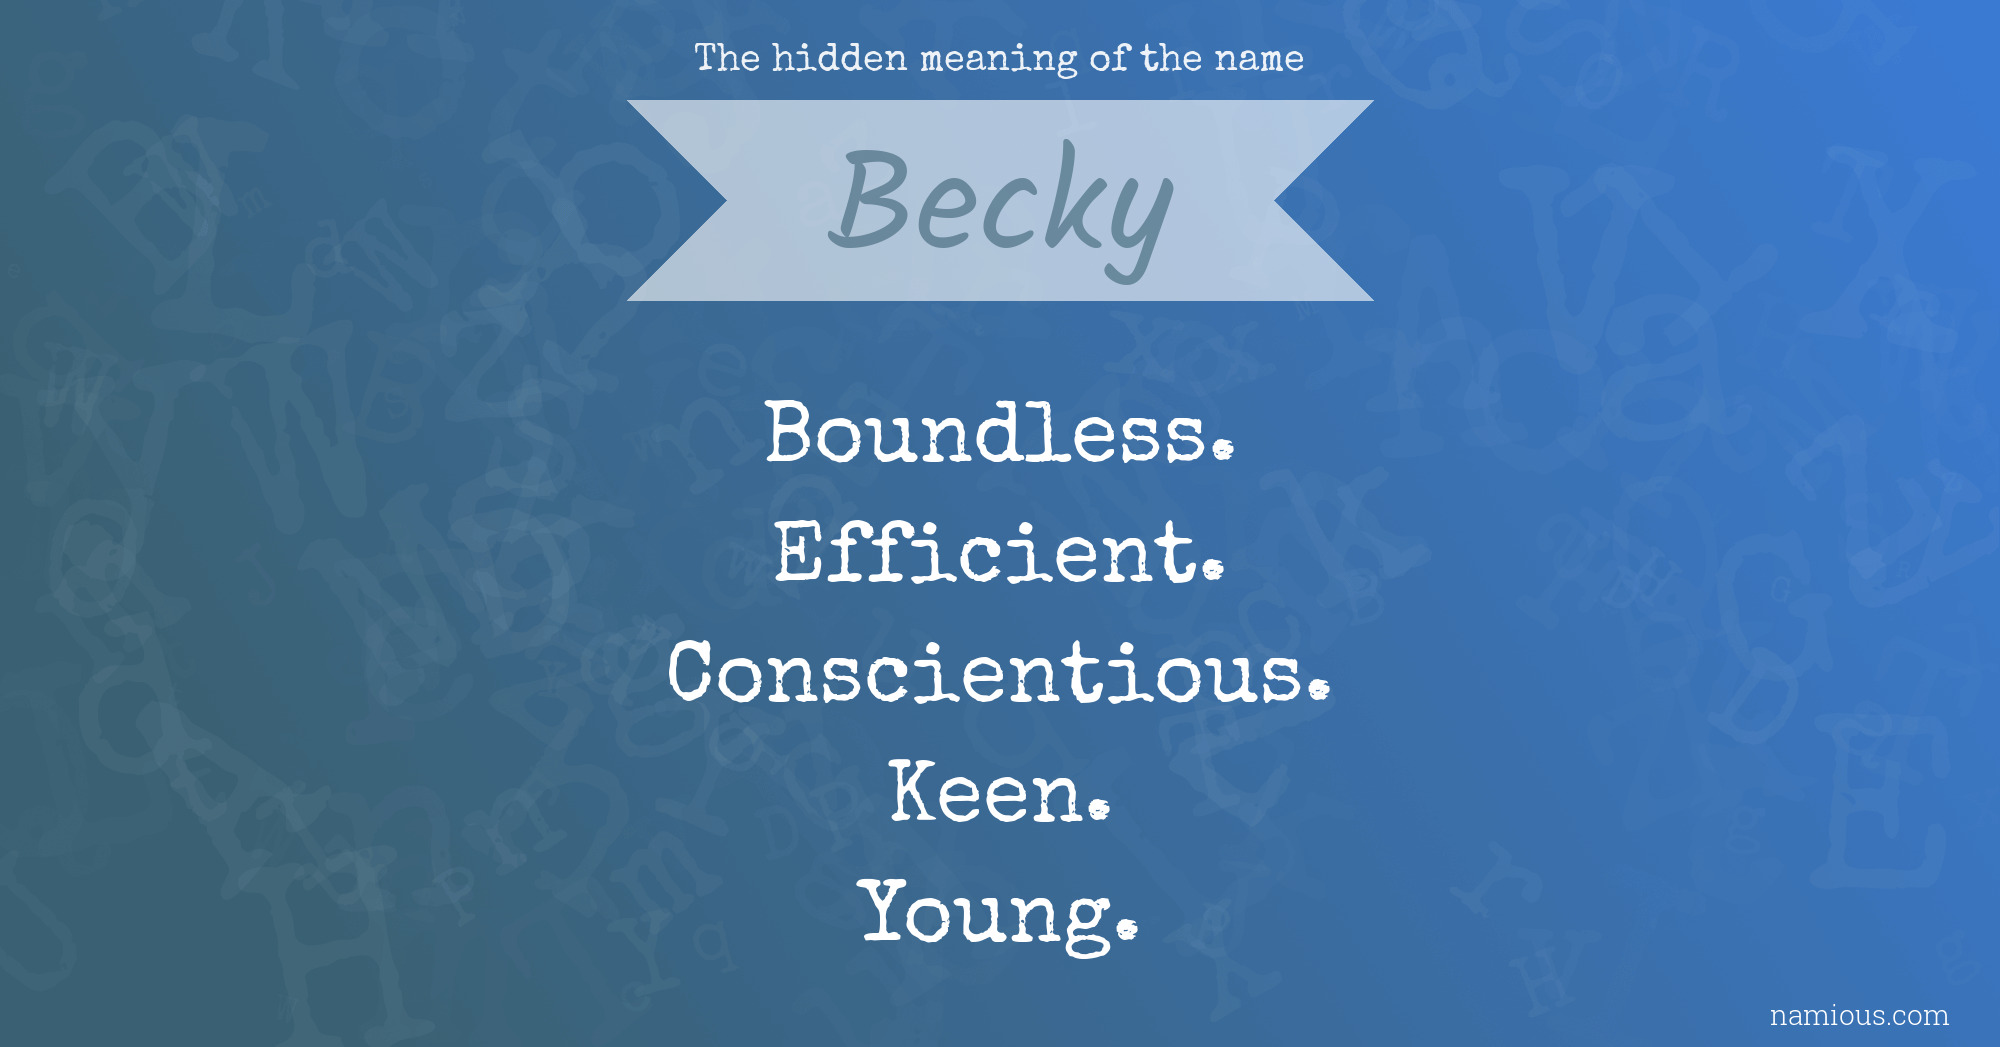 The hidden meaning of the name Becky